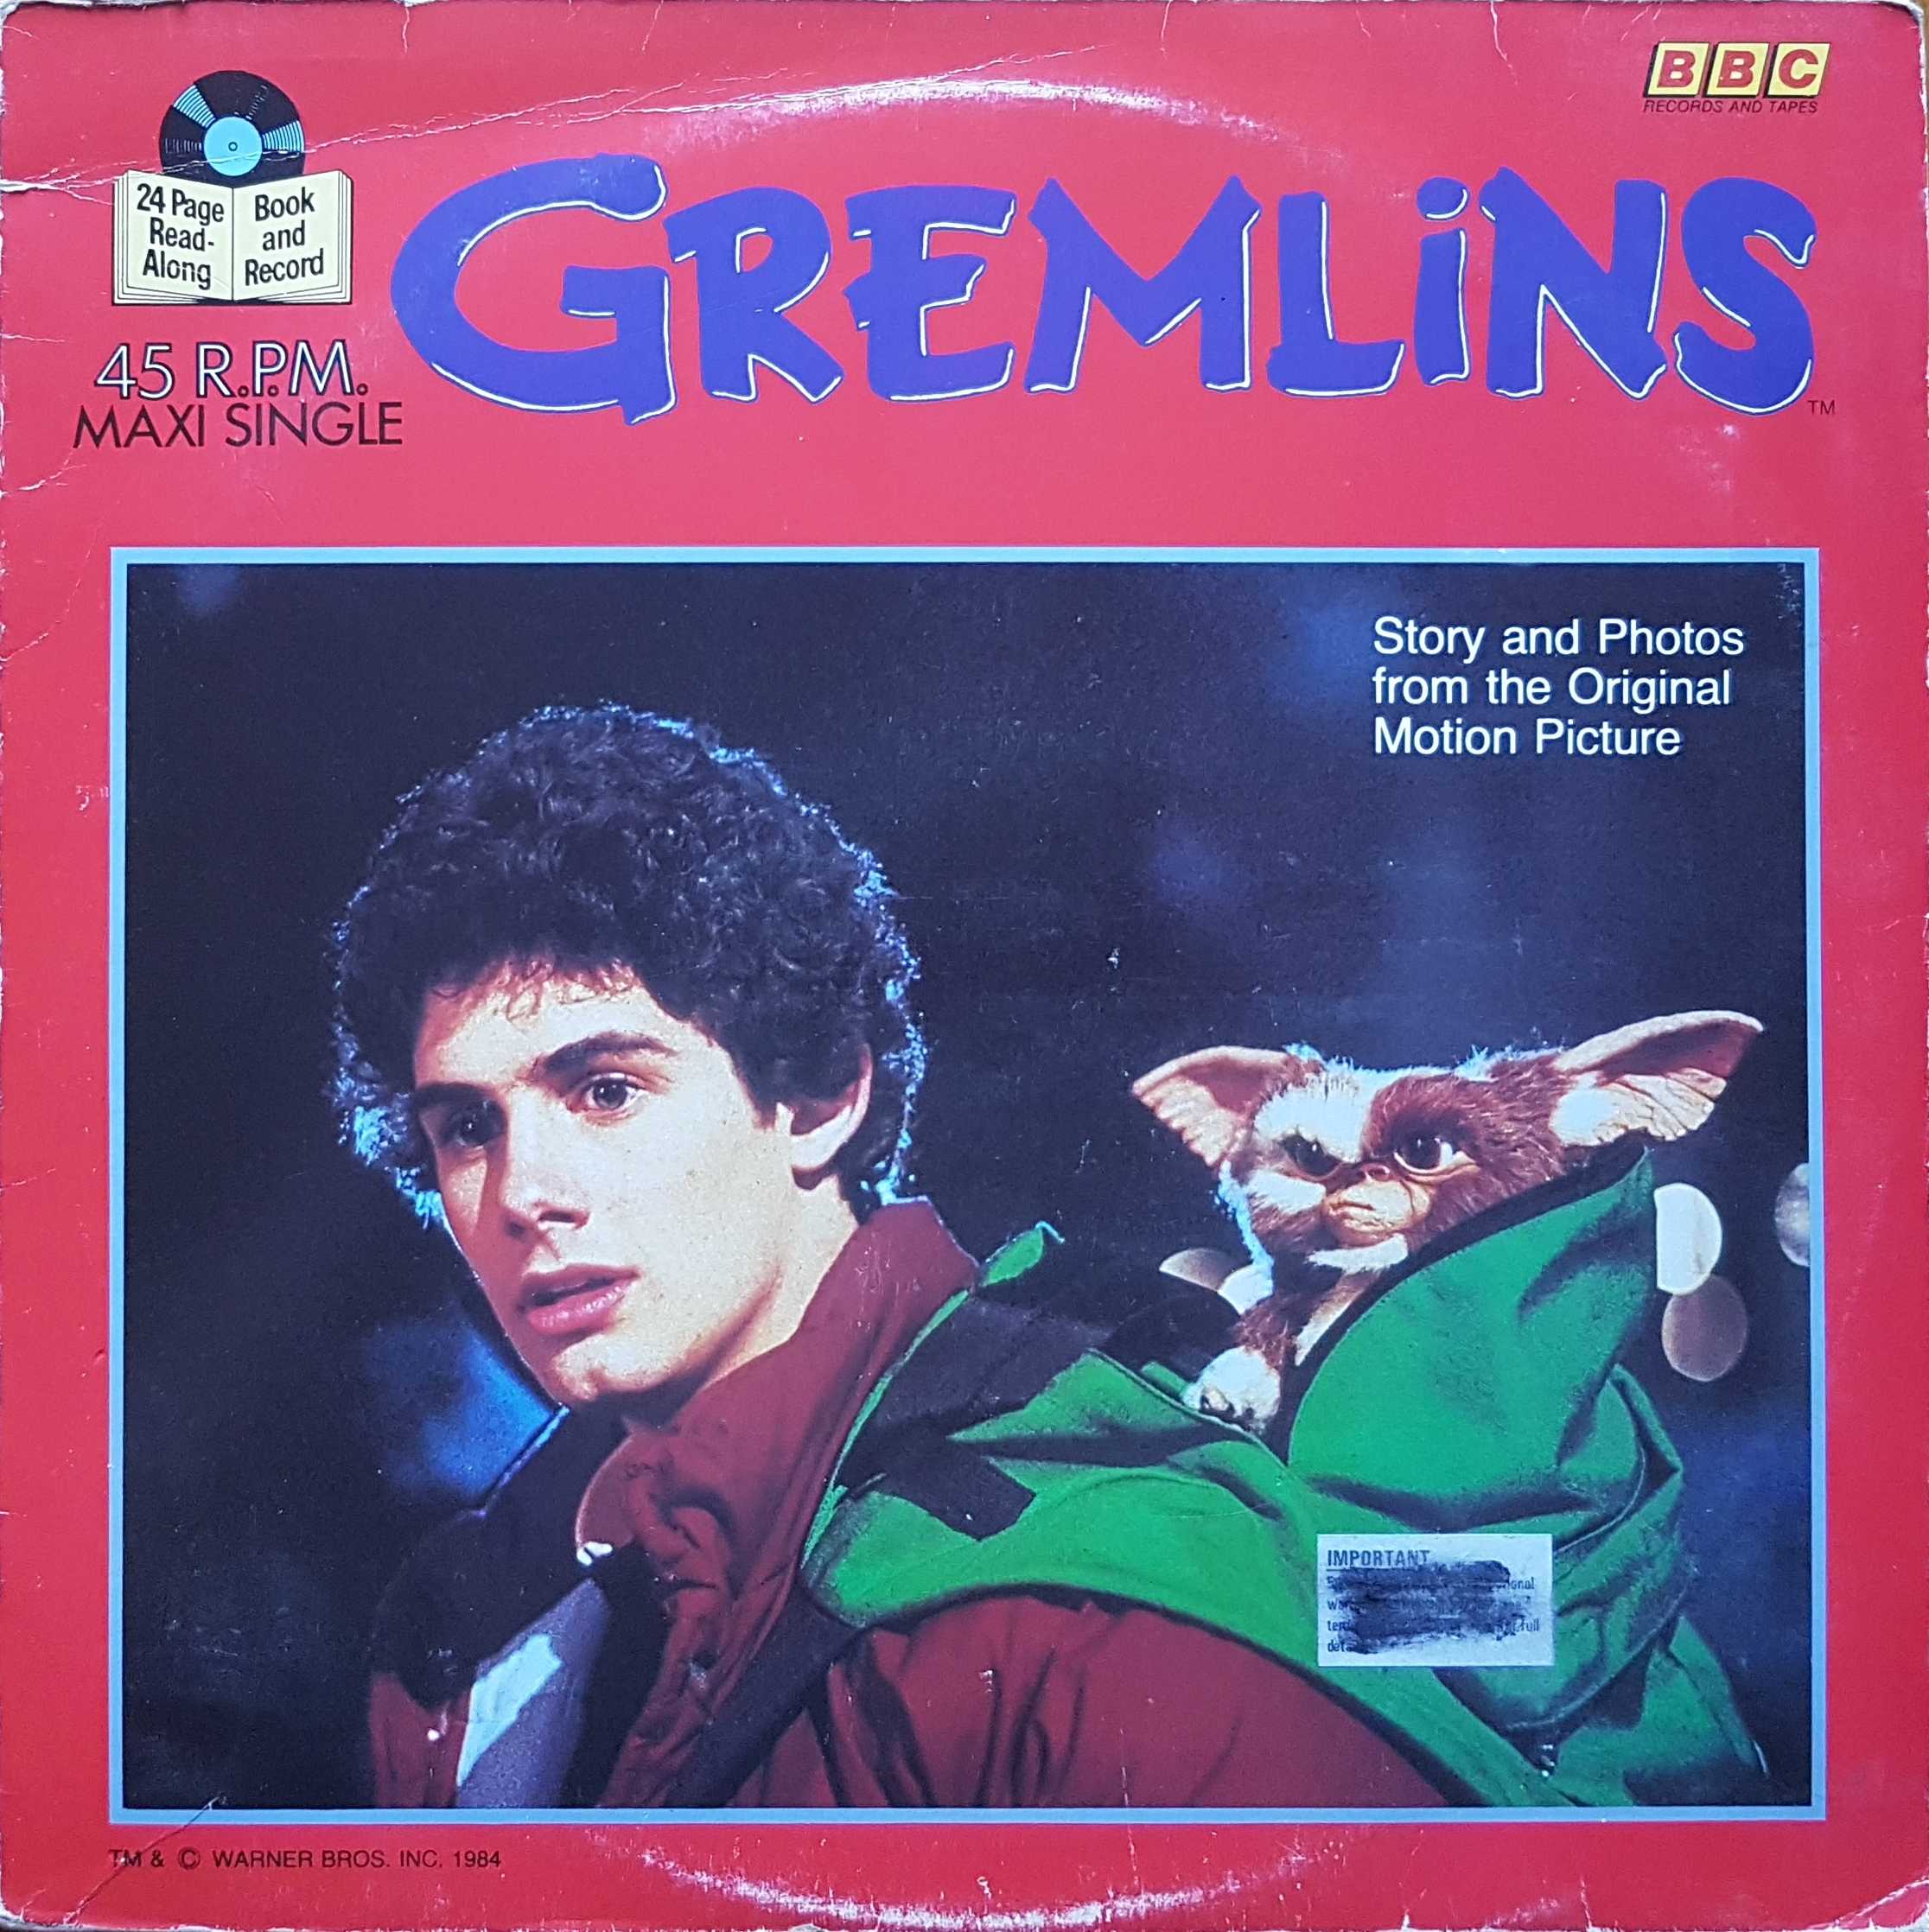 Picture of RESLD 001 Gremlins by artist Unknown from the BBC 12inches - Records and Tapes library